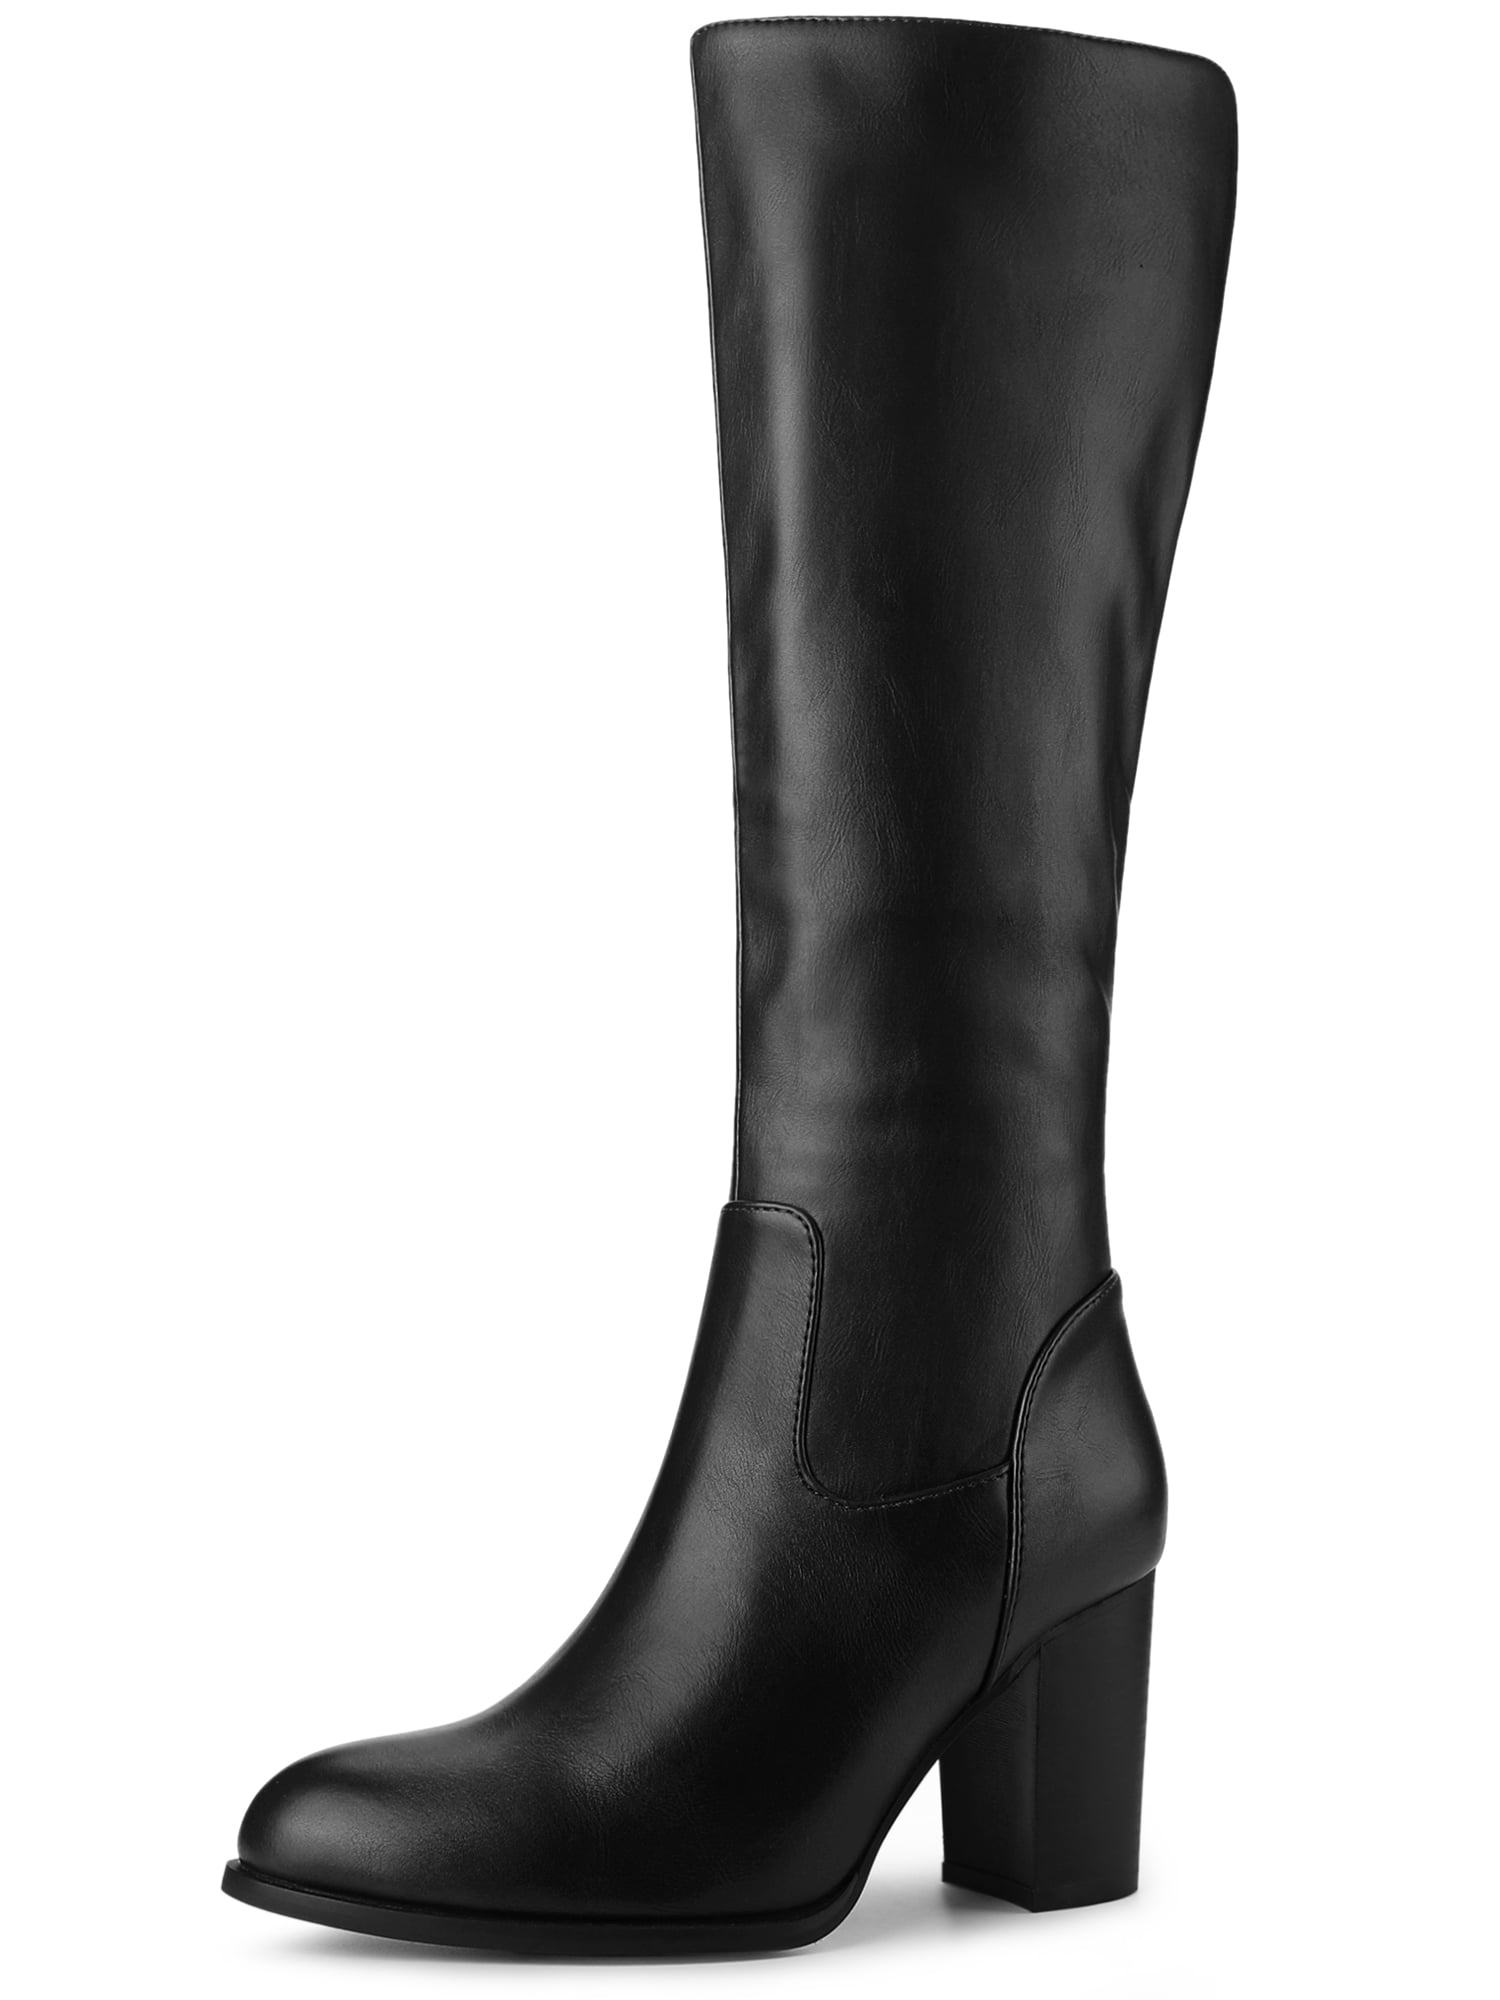 Unique Bargains Women's Round Toe Block Heeled Knee High Boots 